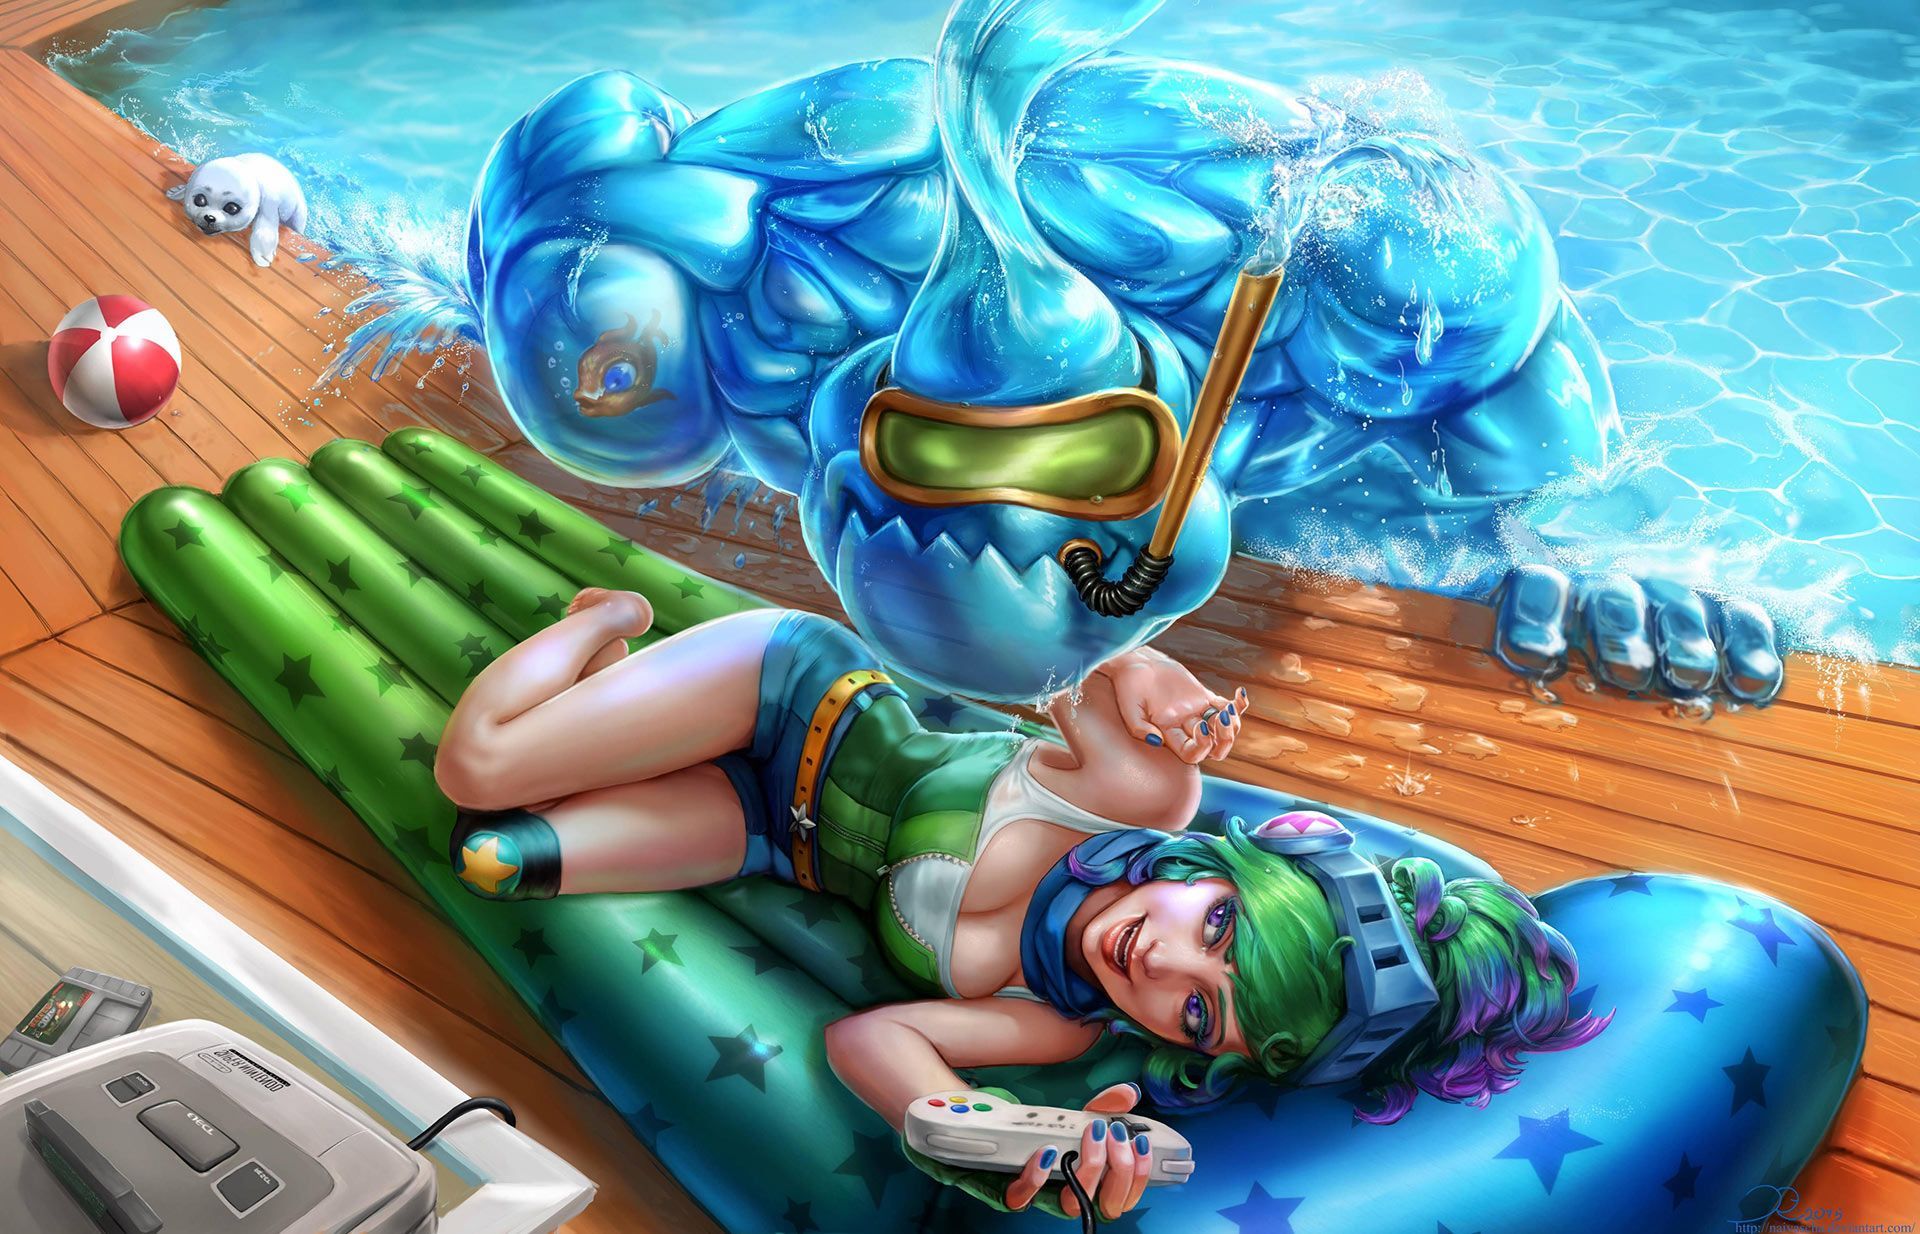 Download wallpaper Fanart Arcade Riven and Zac Pool Party